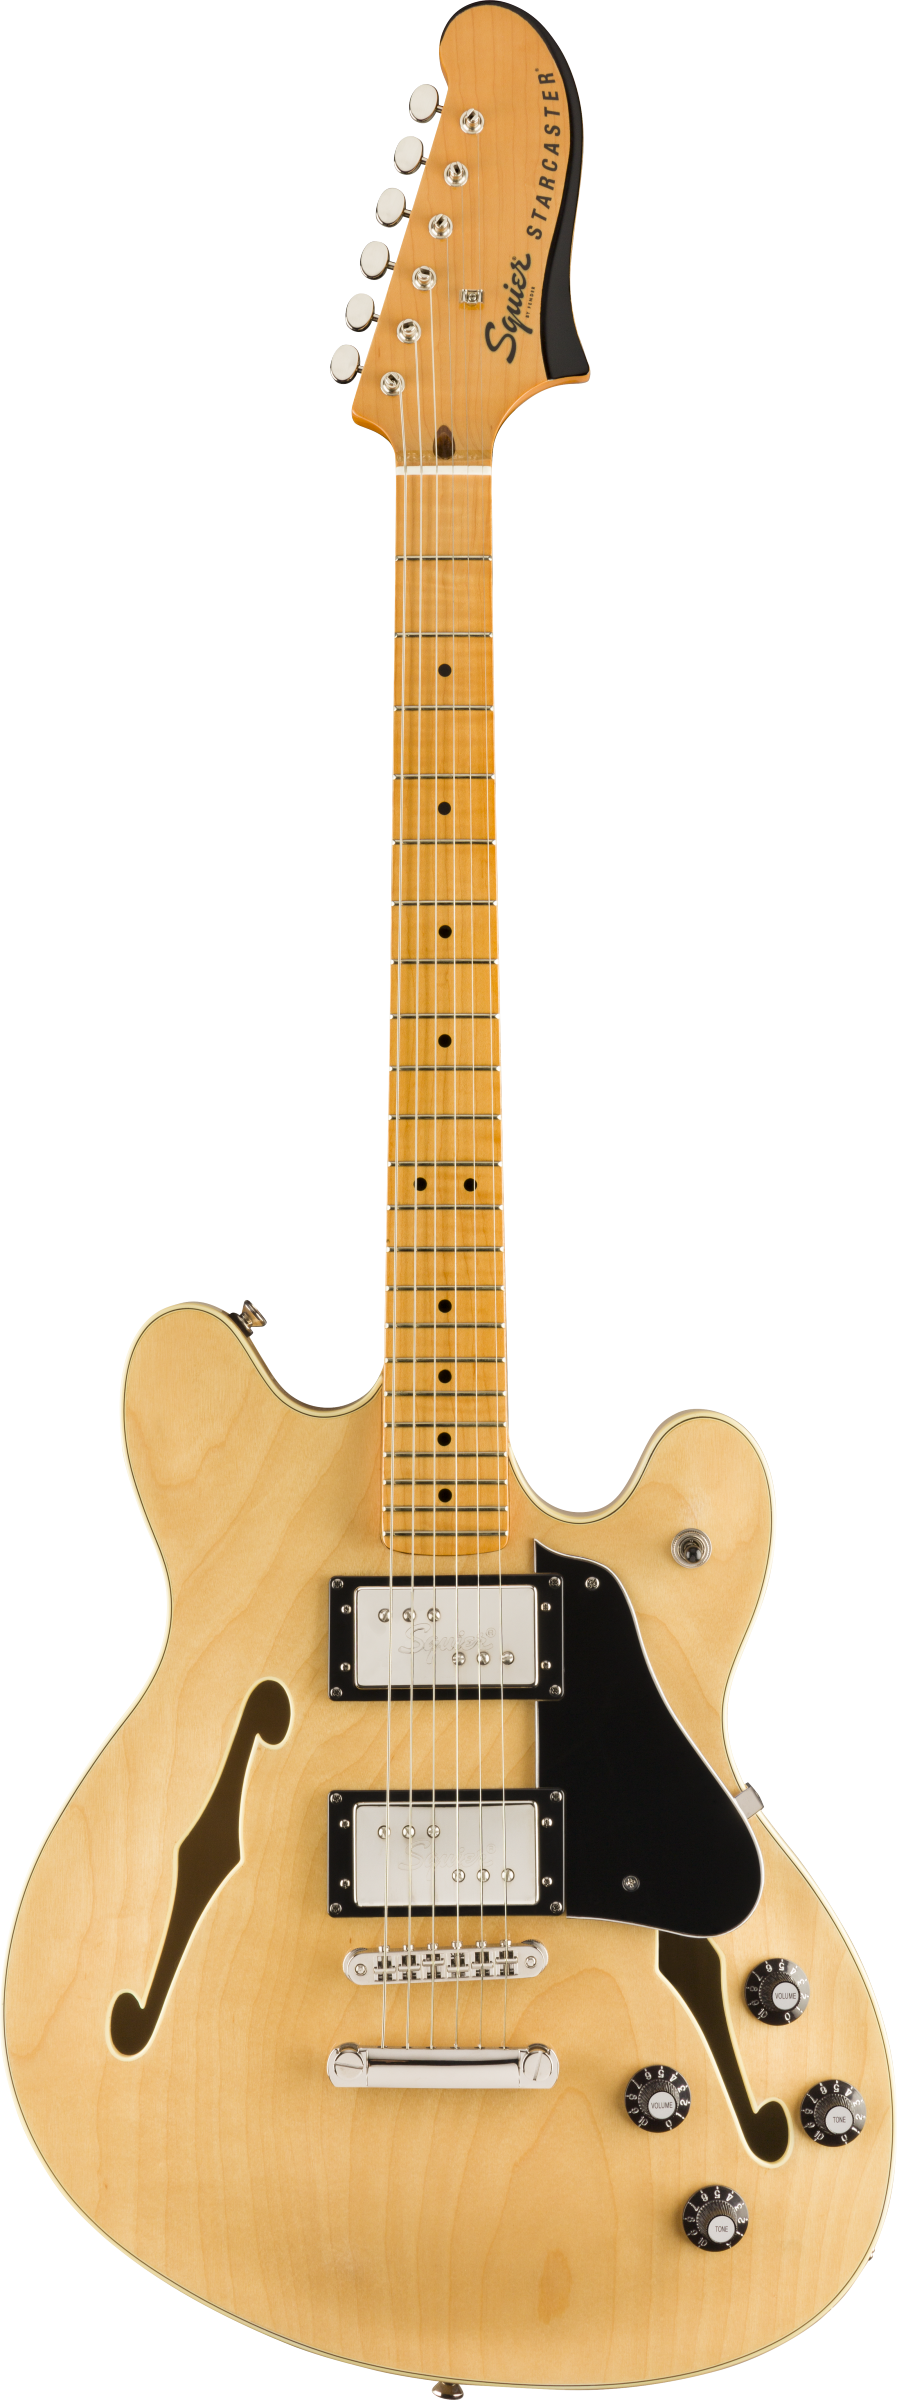 Starcaster Classic vibe natural